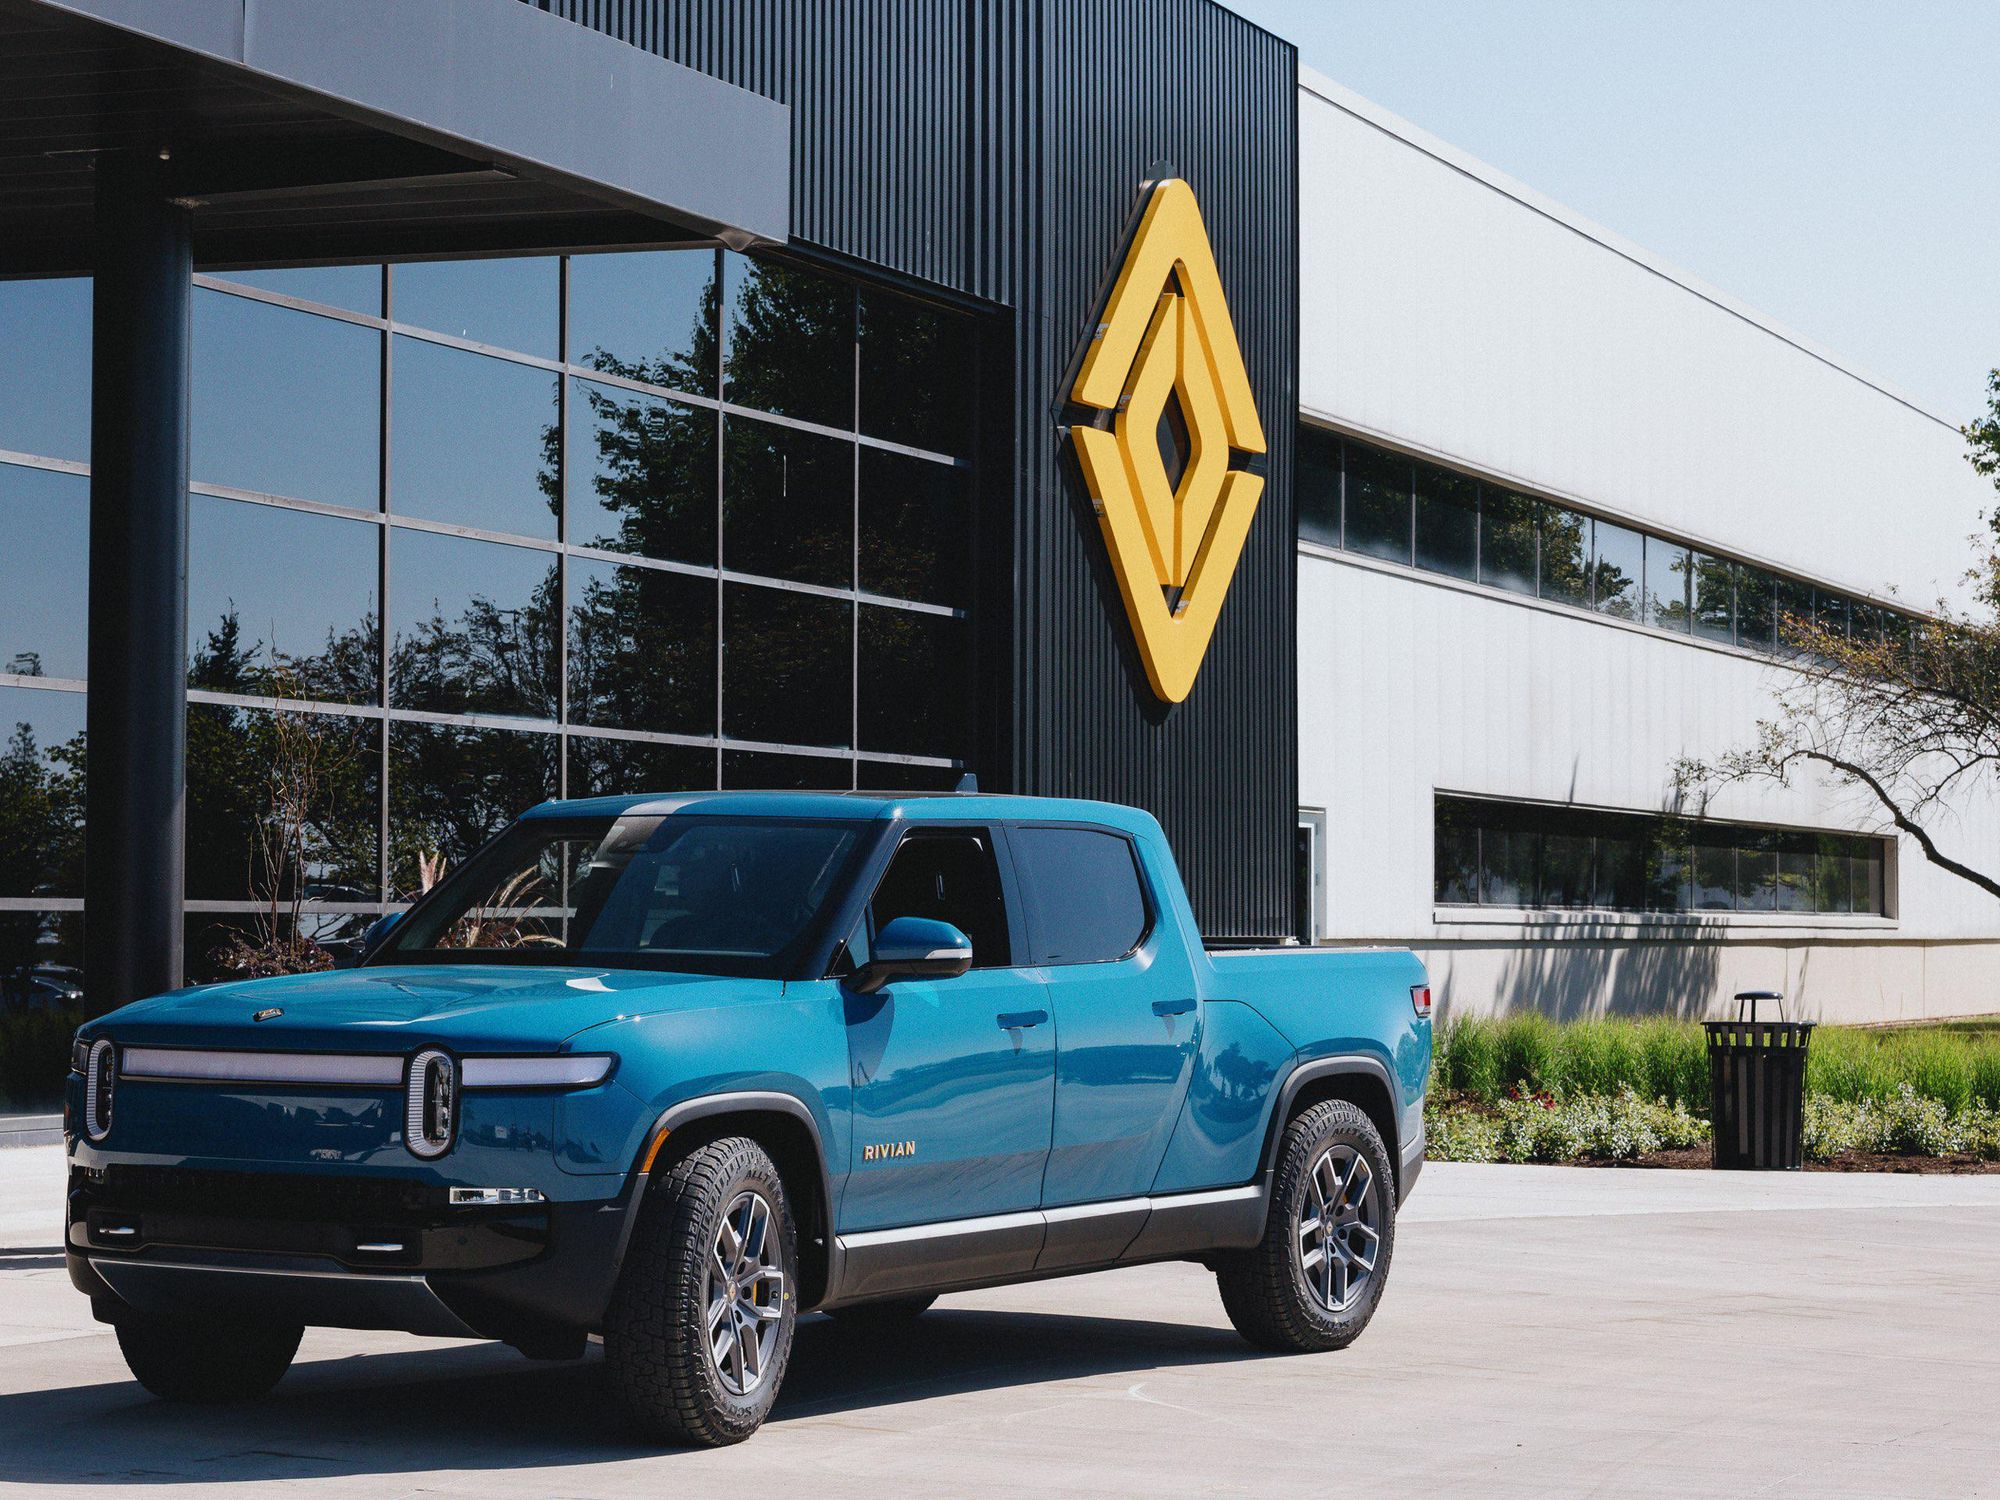 Rivian Continues to Combat Effects of Global Chip Shortage with Supply Chain Investment and Delivery Updates